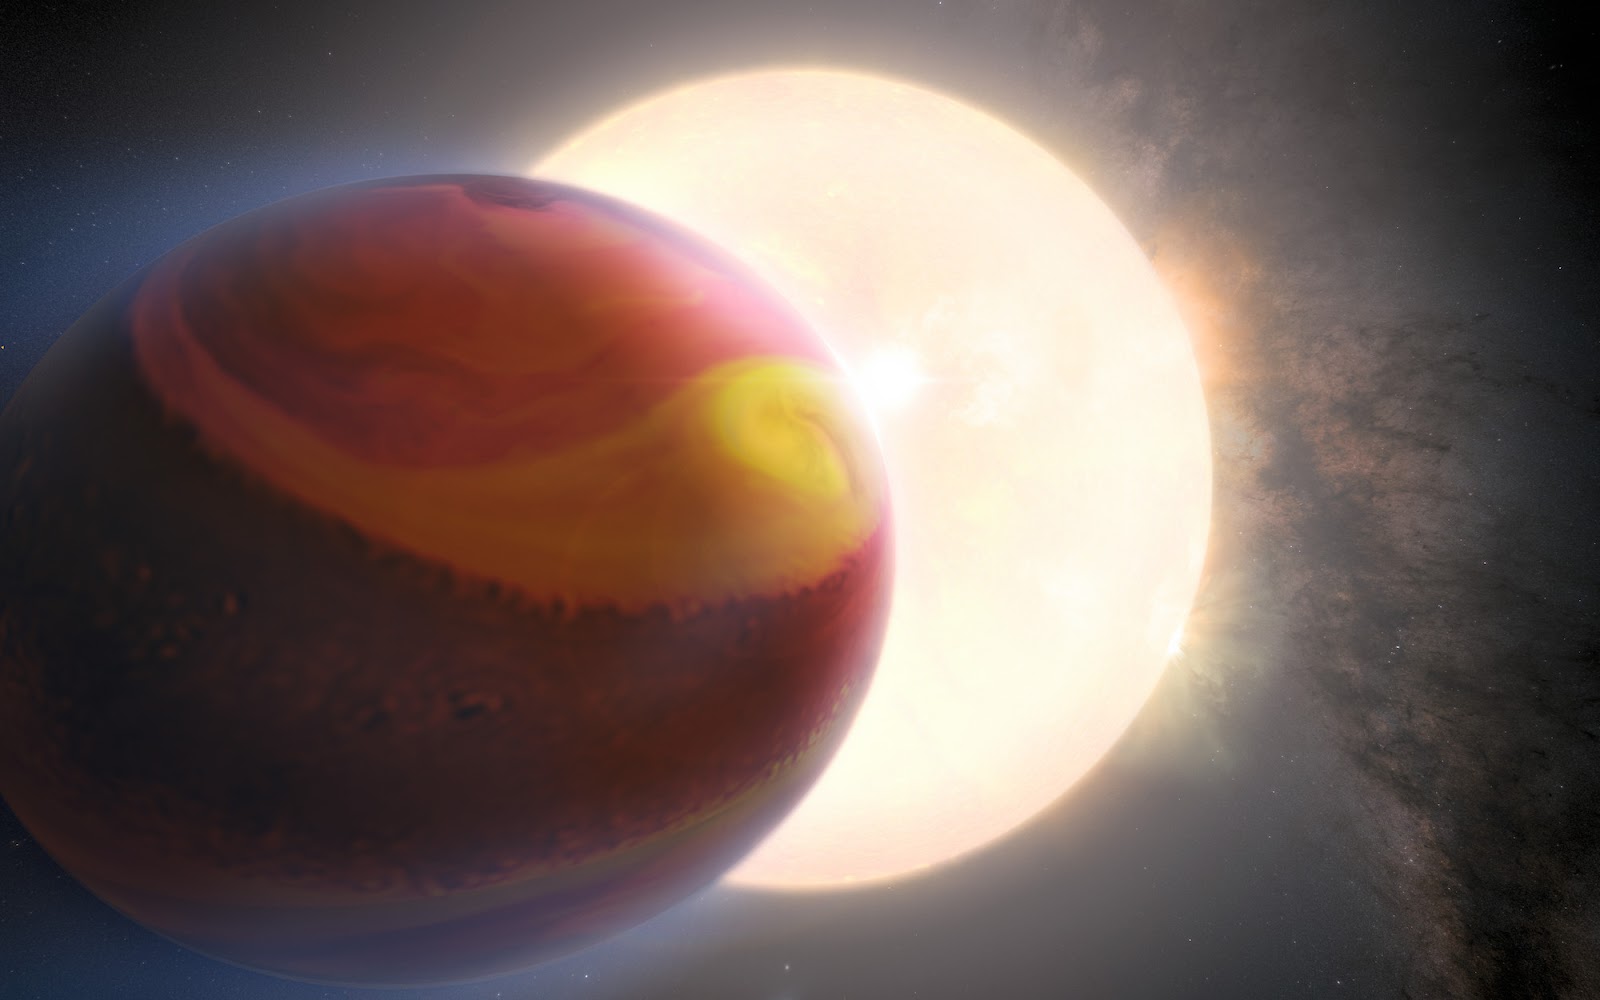 An artist's impression of the exoplanet WASP-121 b and its star